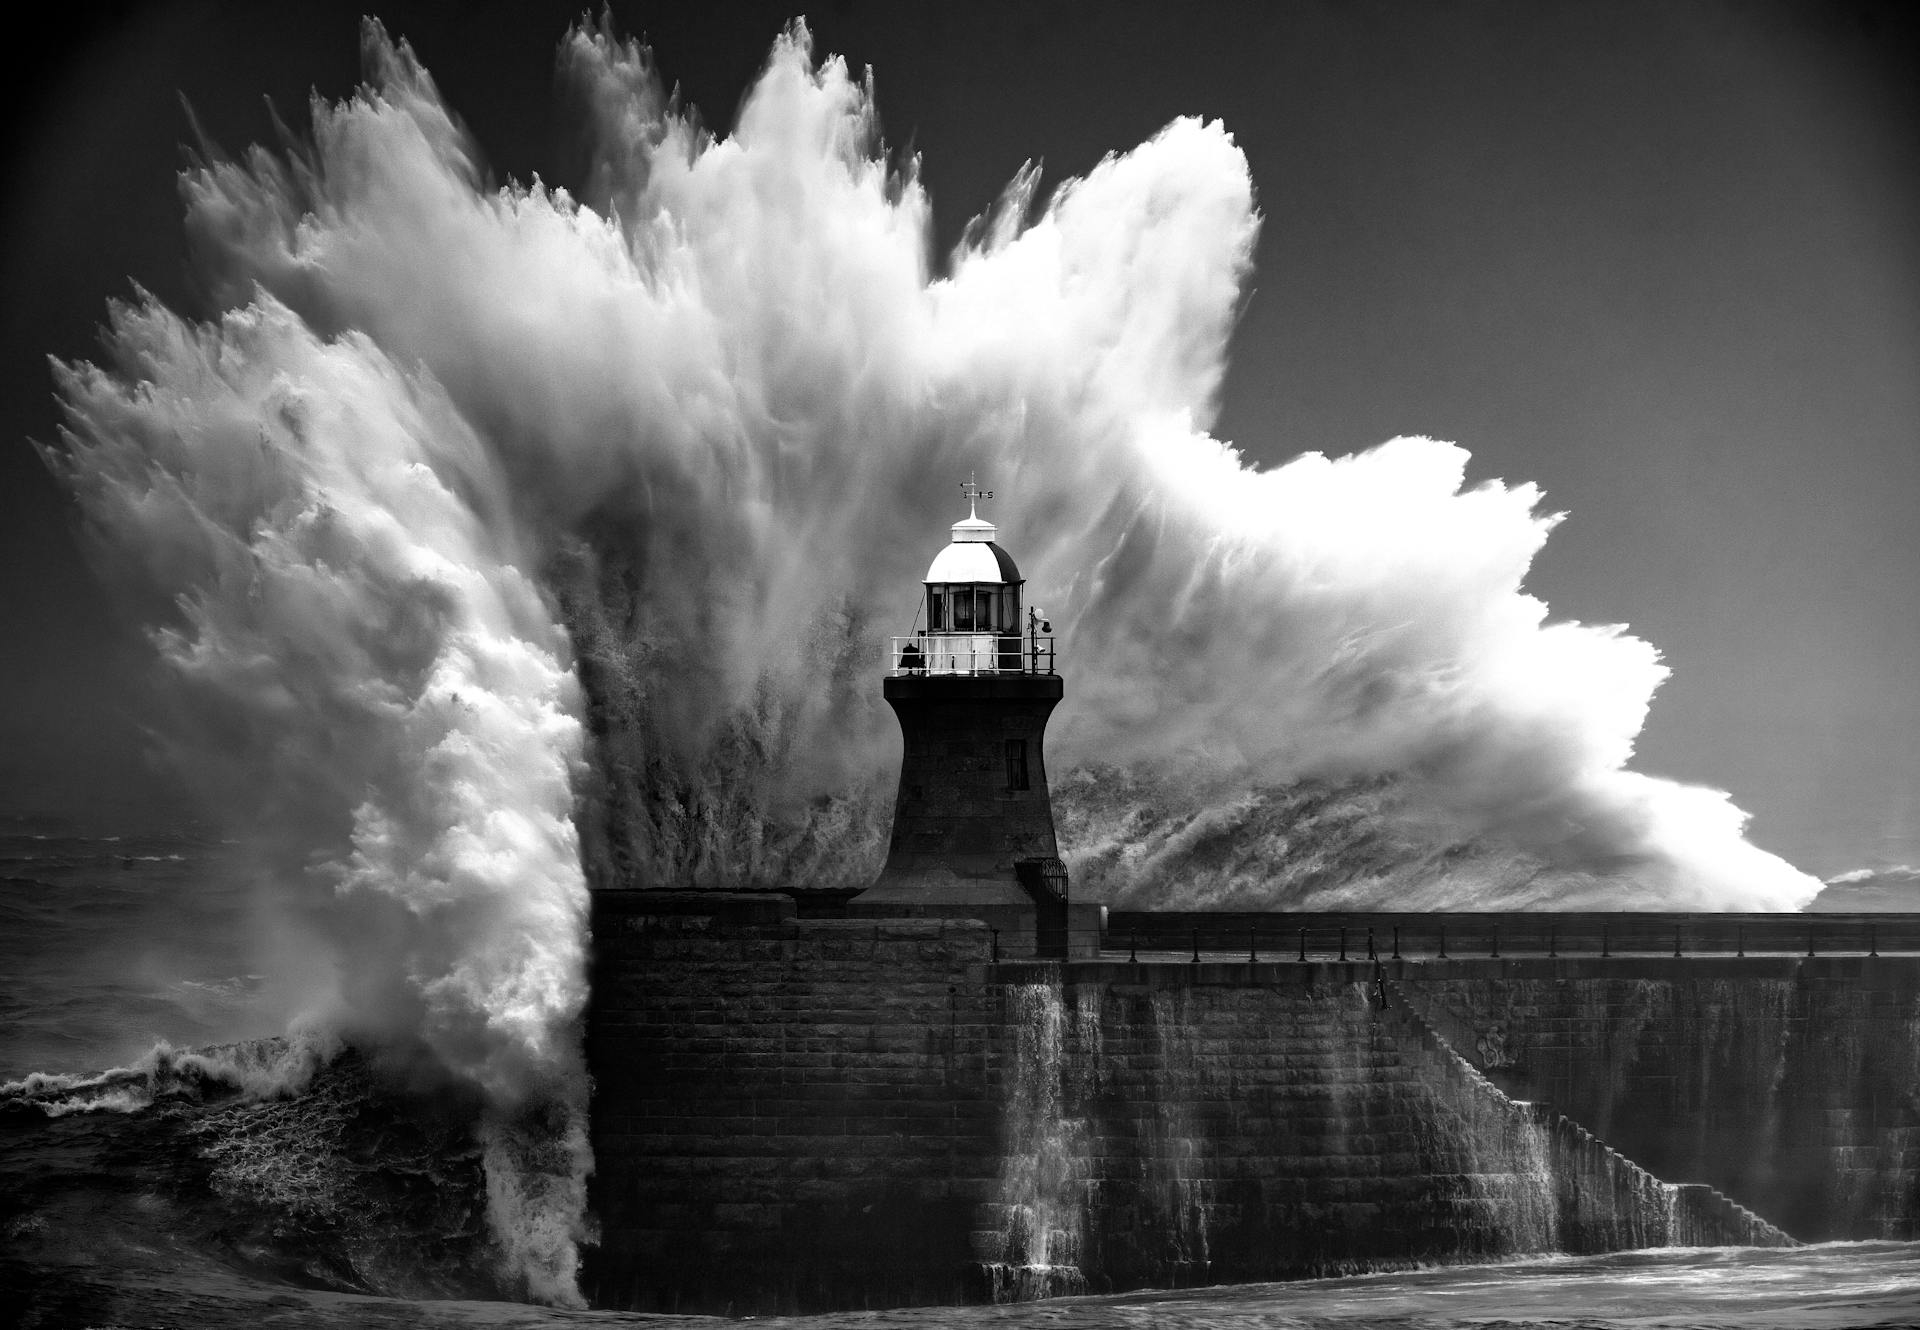 A huge wave rises behind a pier and a lighthouse in a black and white image